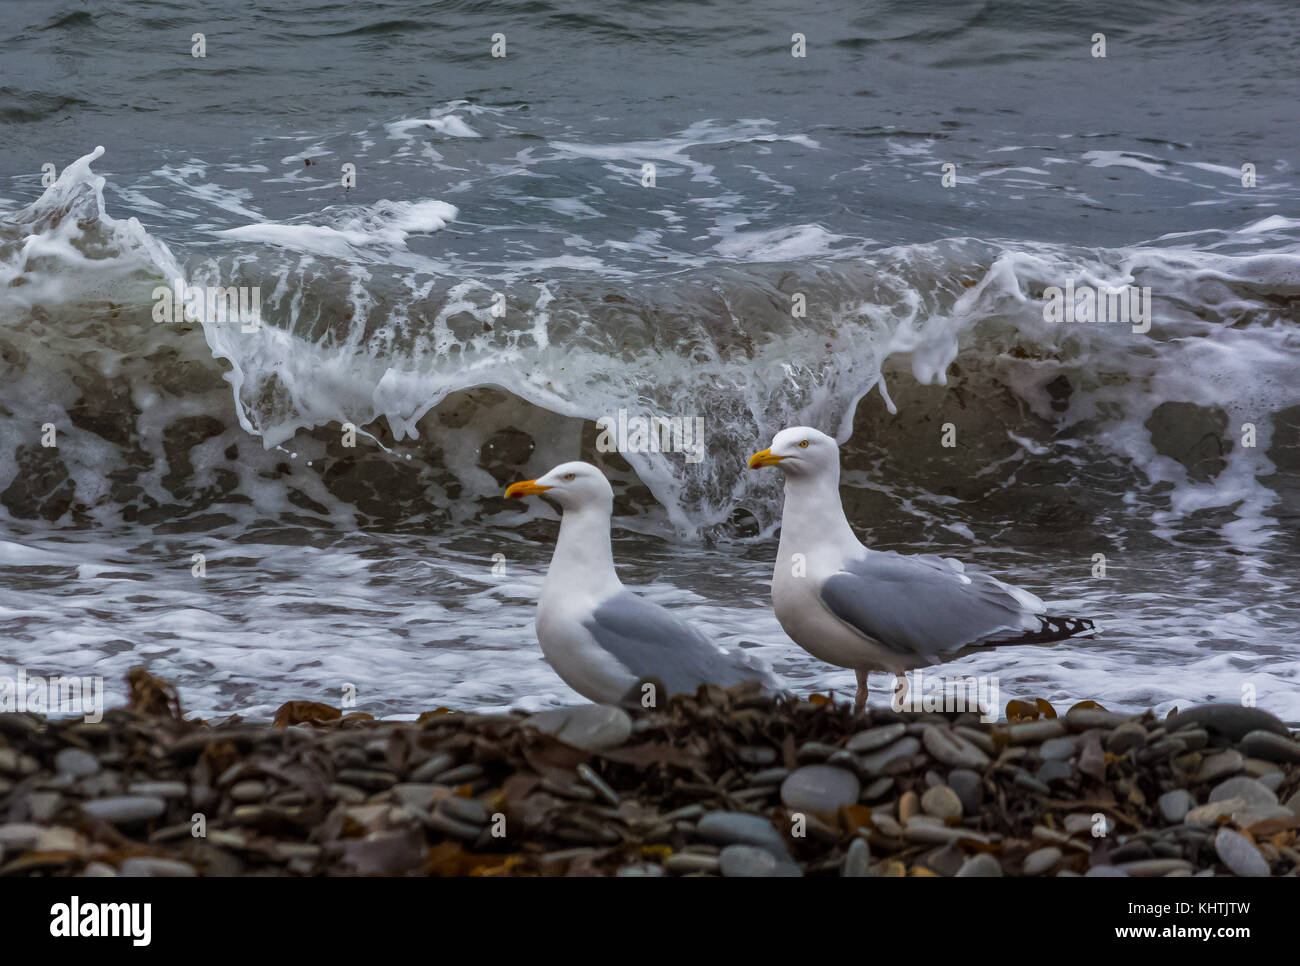 Two Seagulls and a Wave Stock Photo